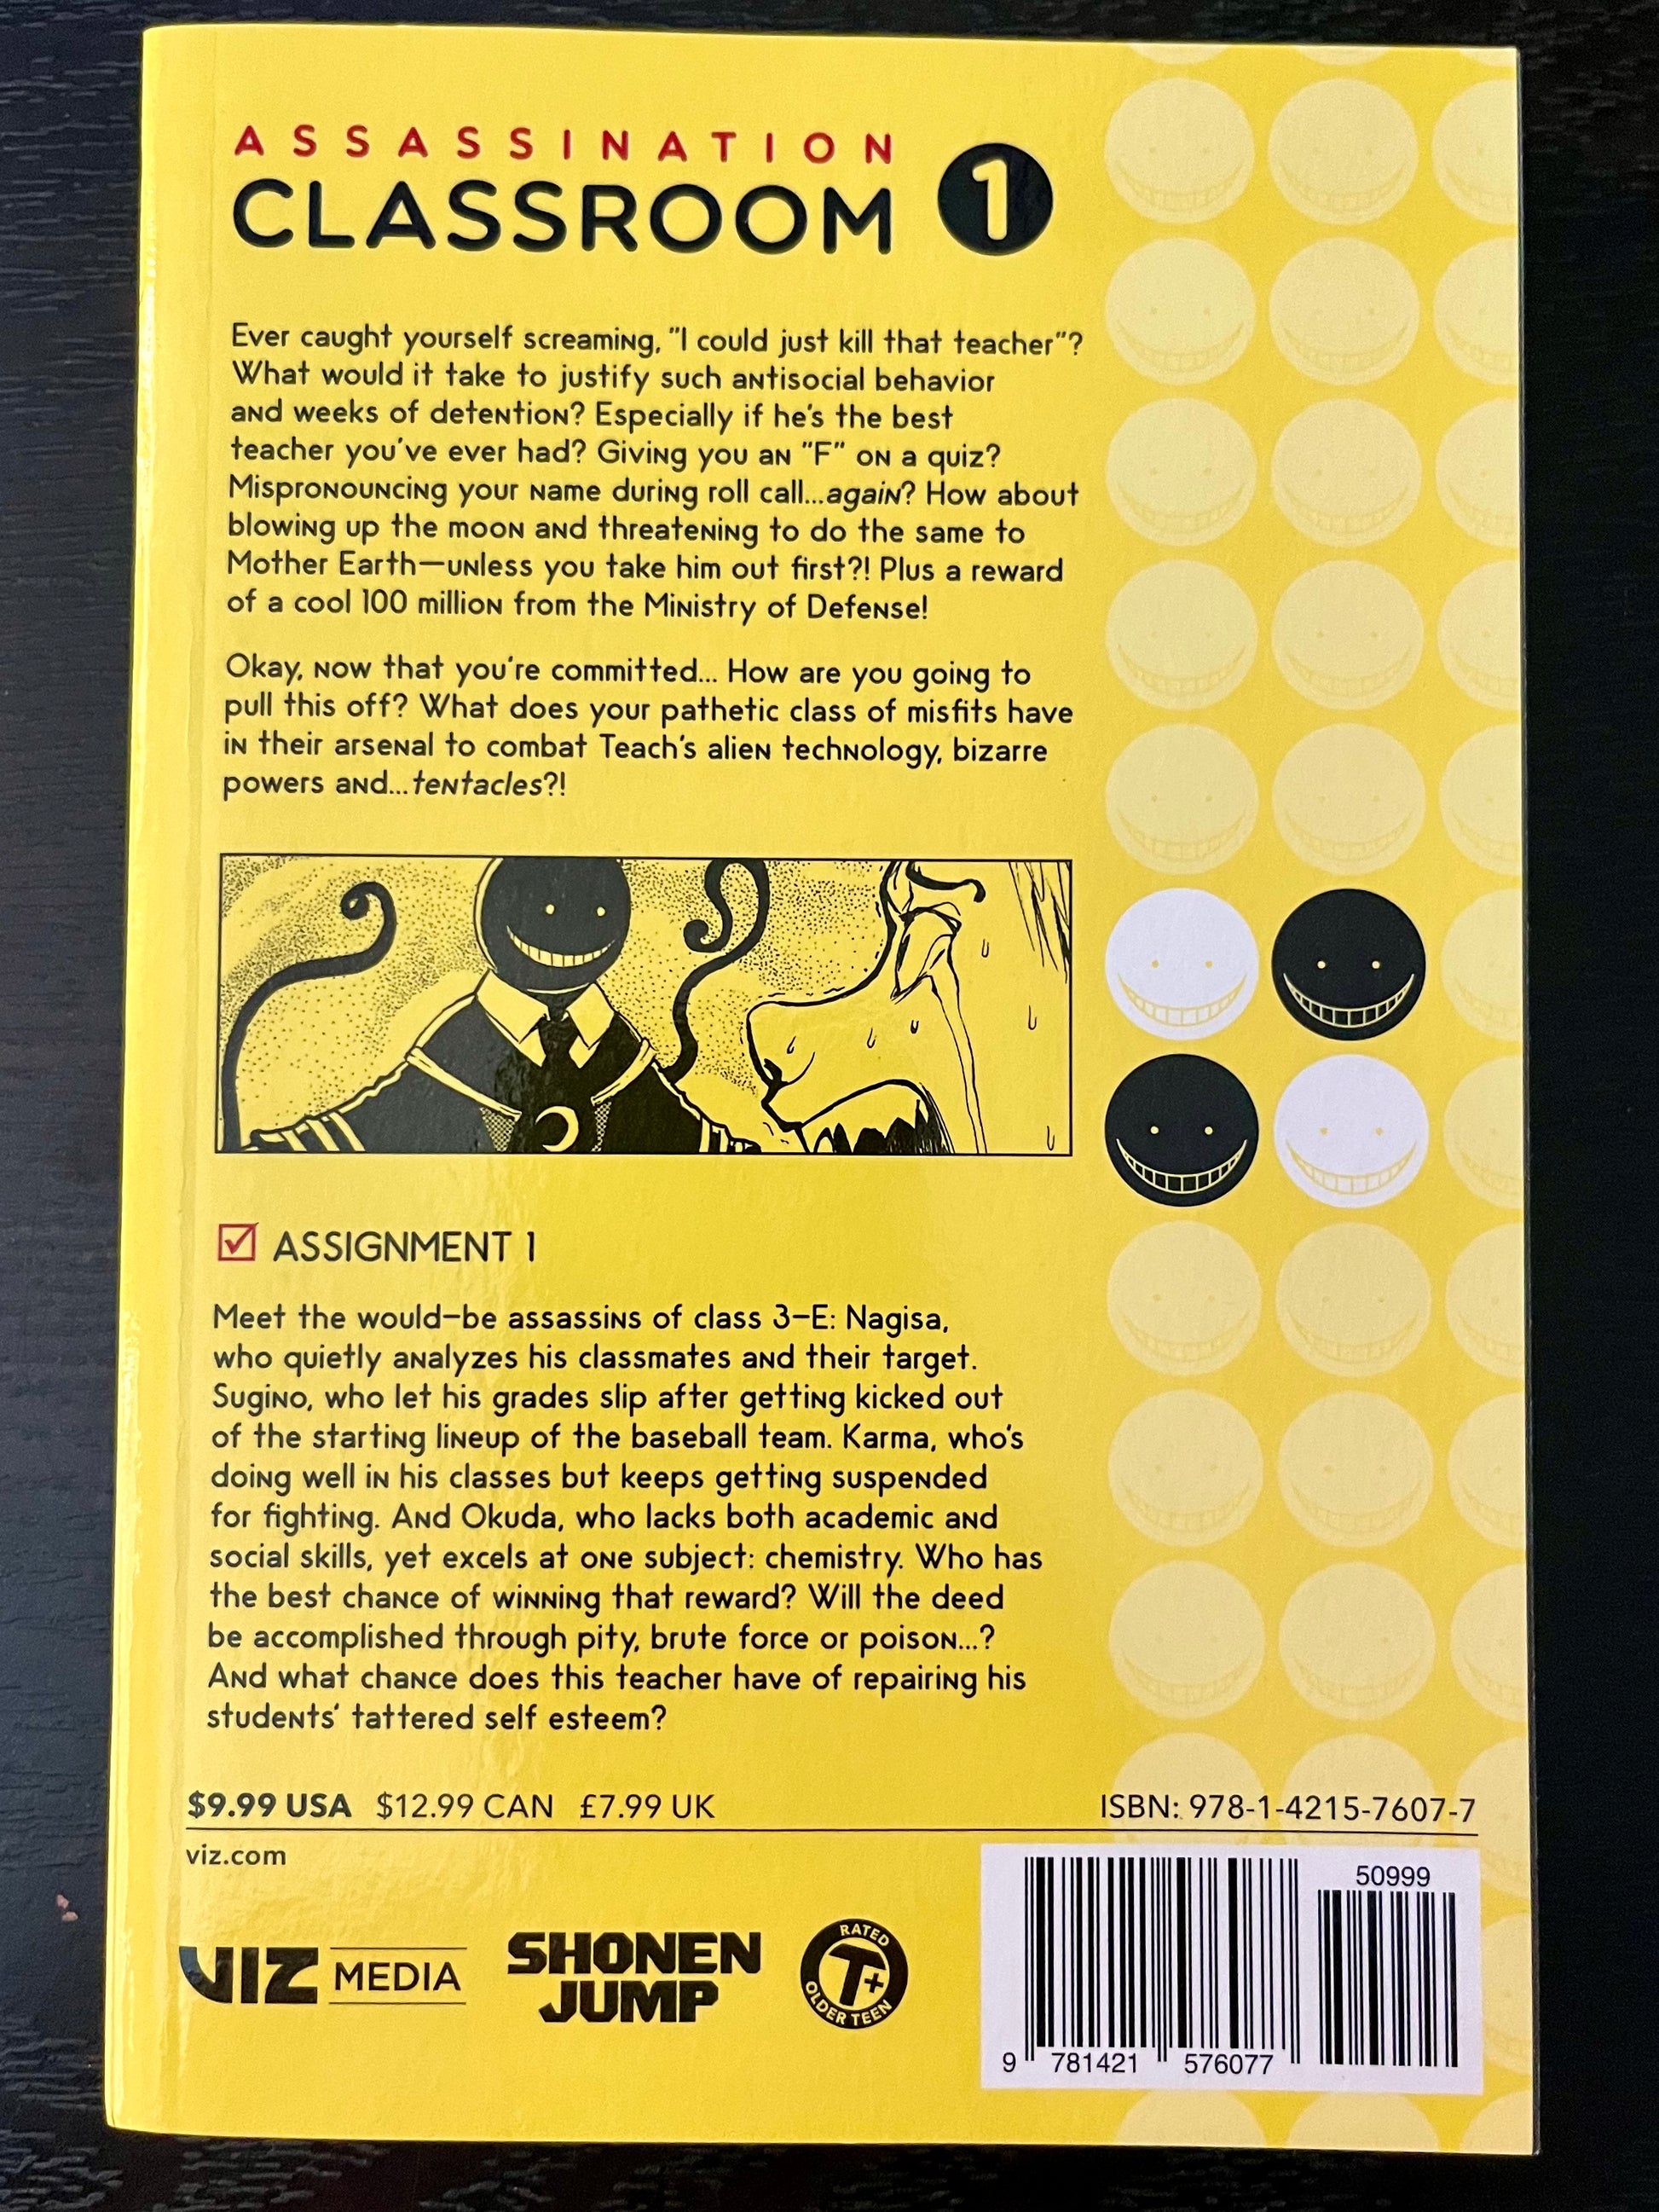 Assassination Classroom Manga Vol 1 Brand New! - Tales from the Tangle